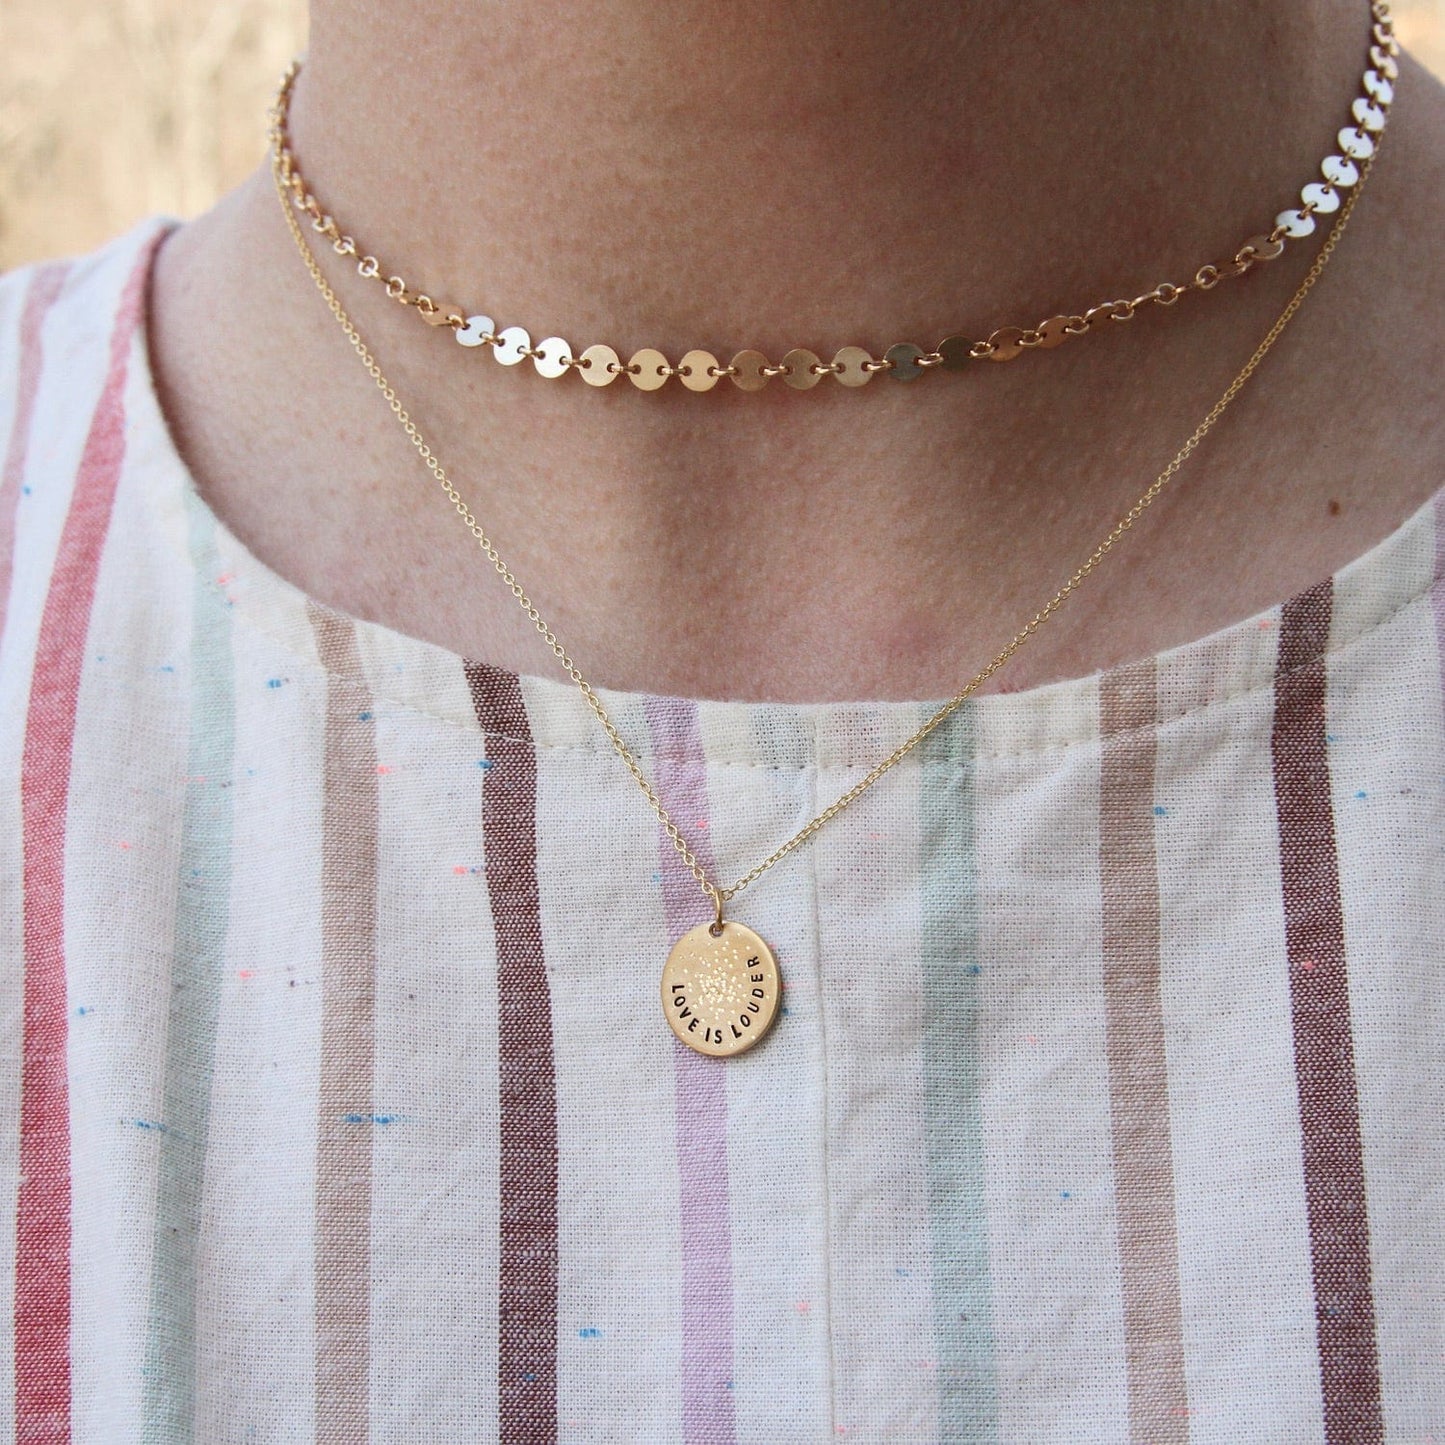 NKL-GPL Diamond Dusted Mini Coin Necklace - "Love is Louder"